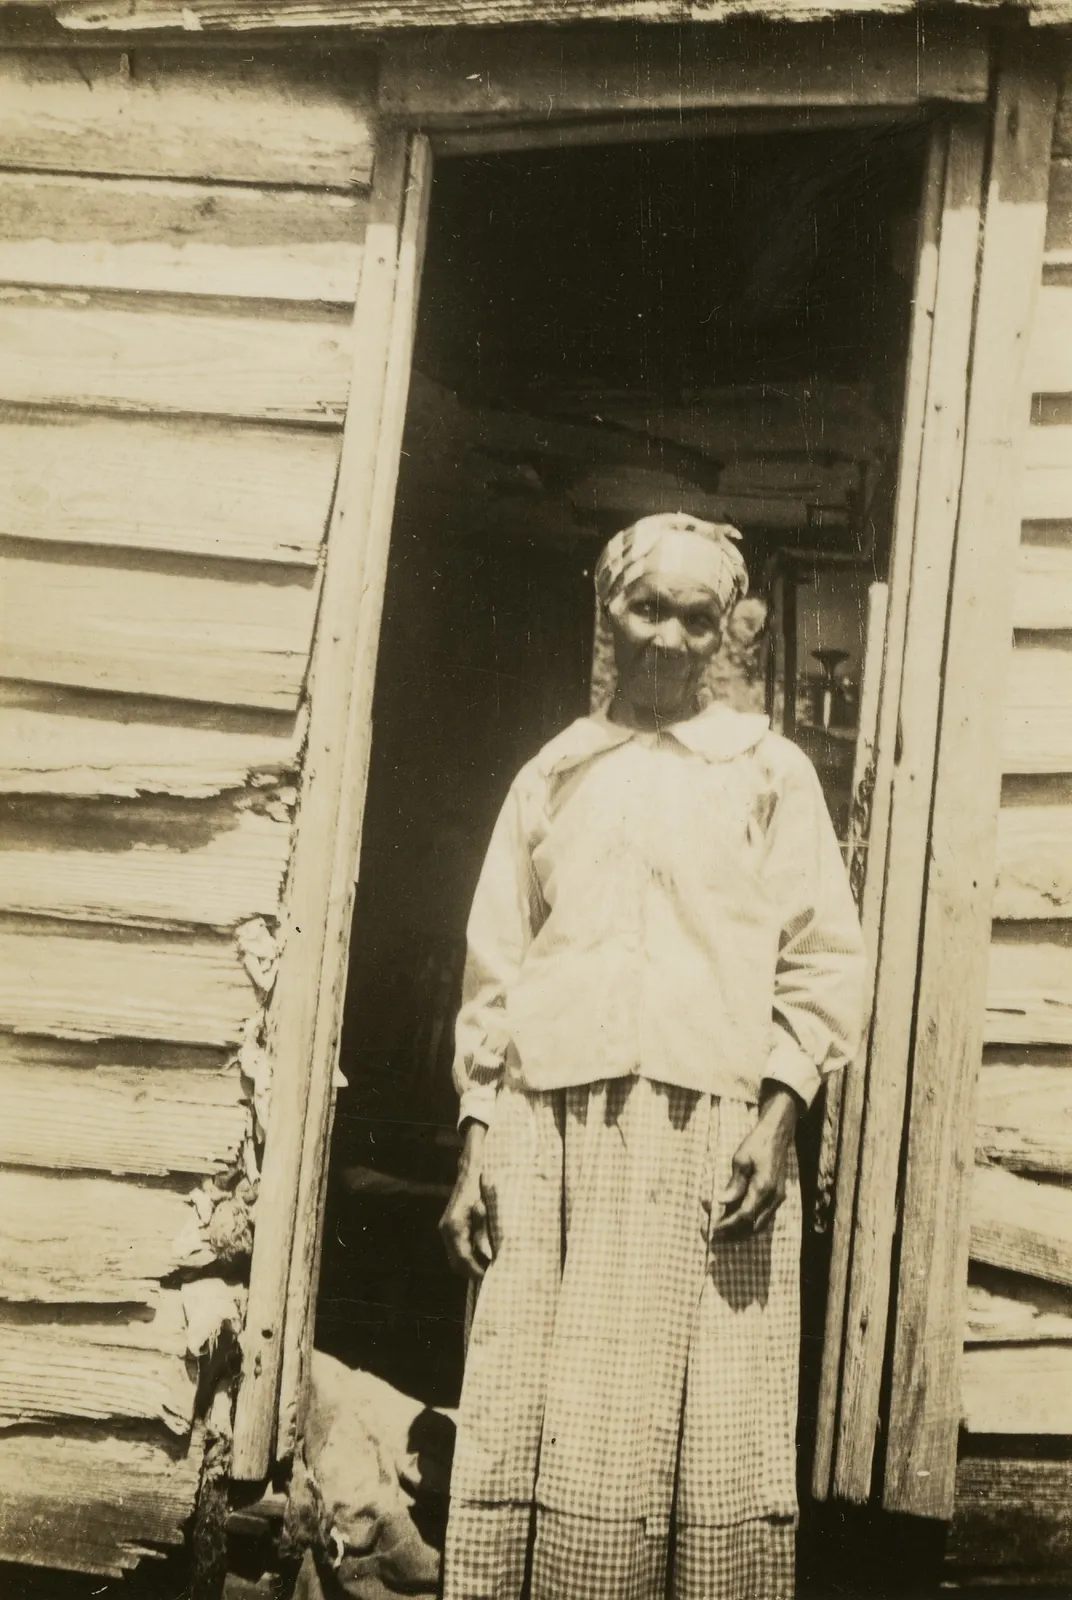 Lizzie Grant, a Gullah Geechee woman photographed by Turner in the early 1930s